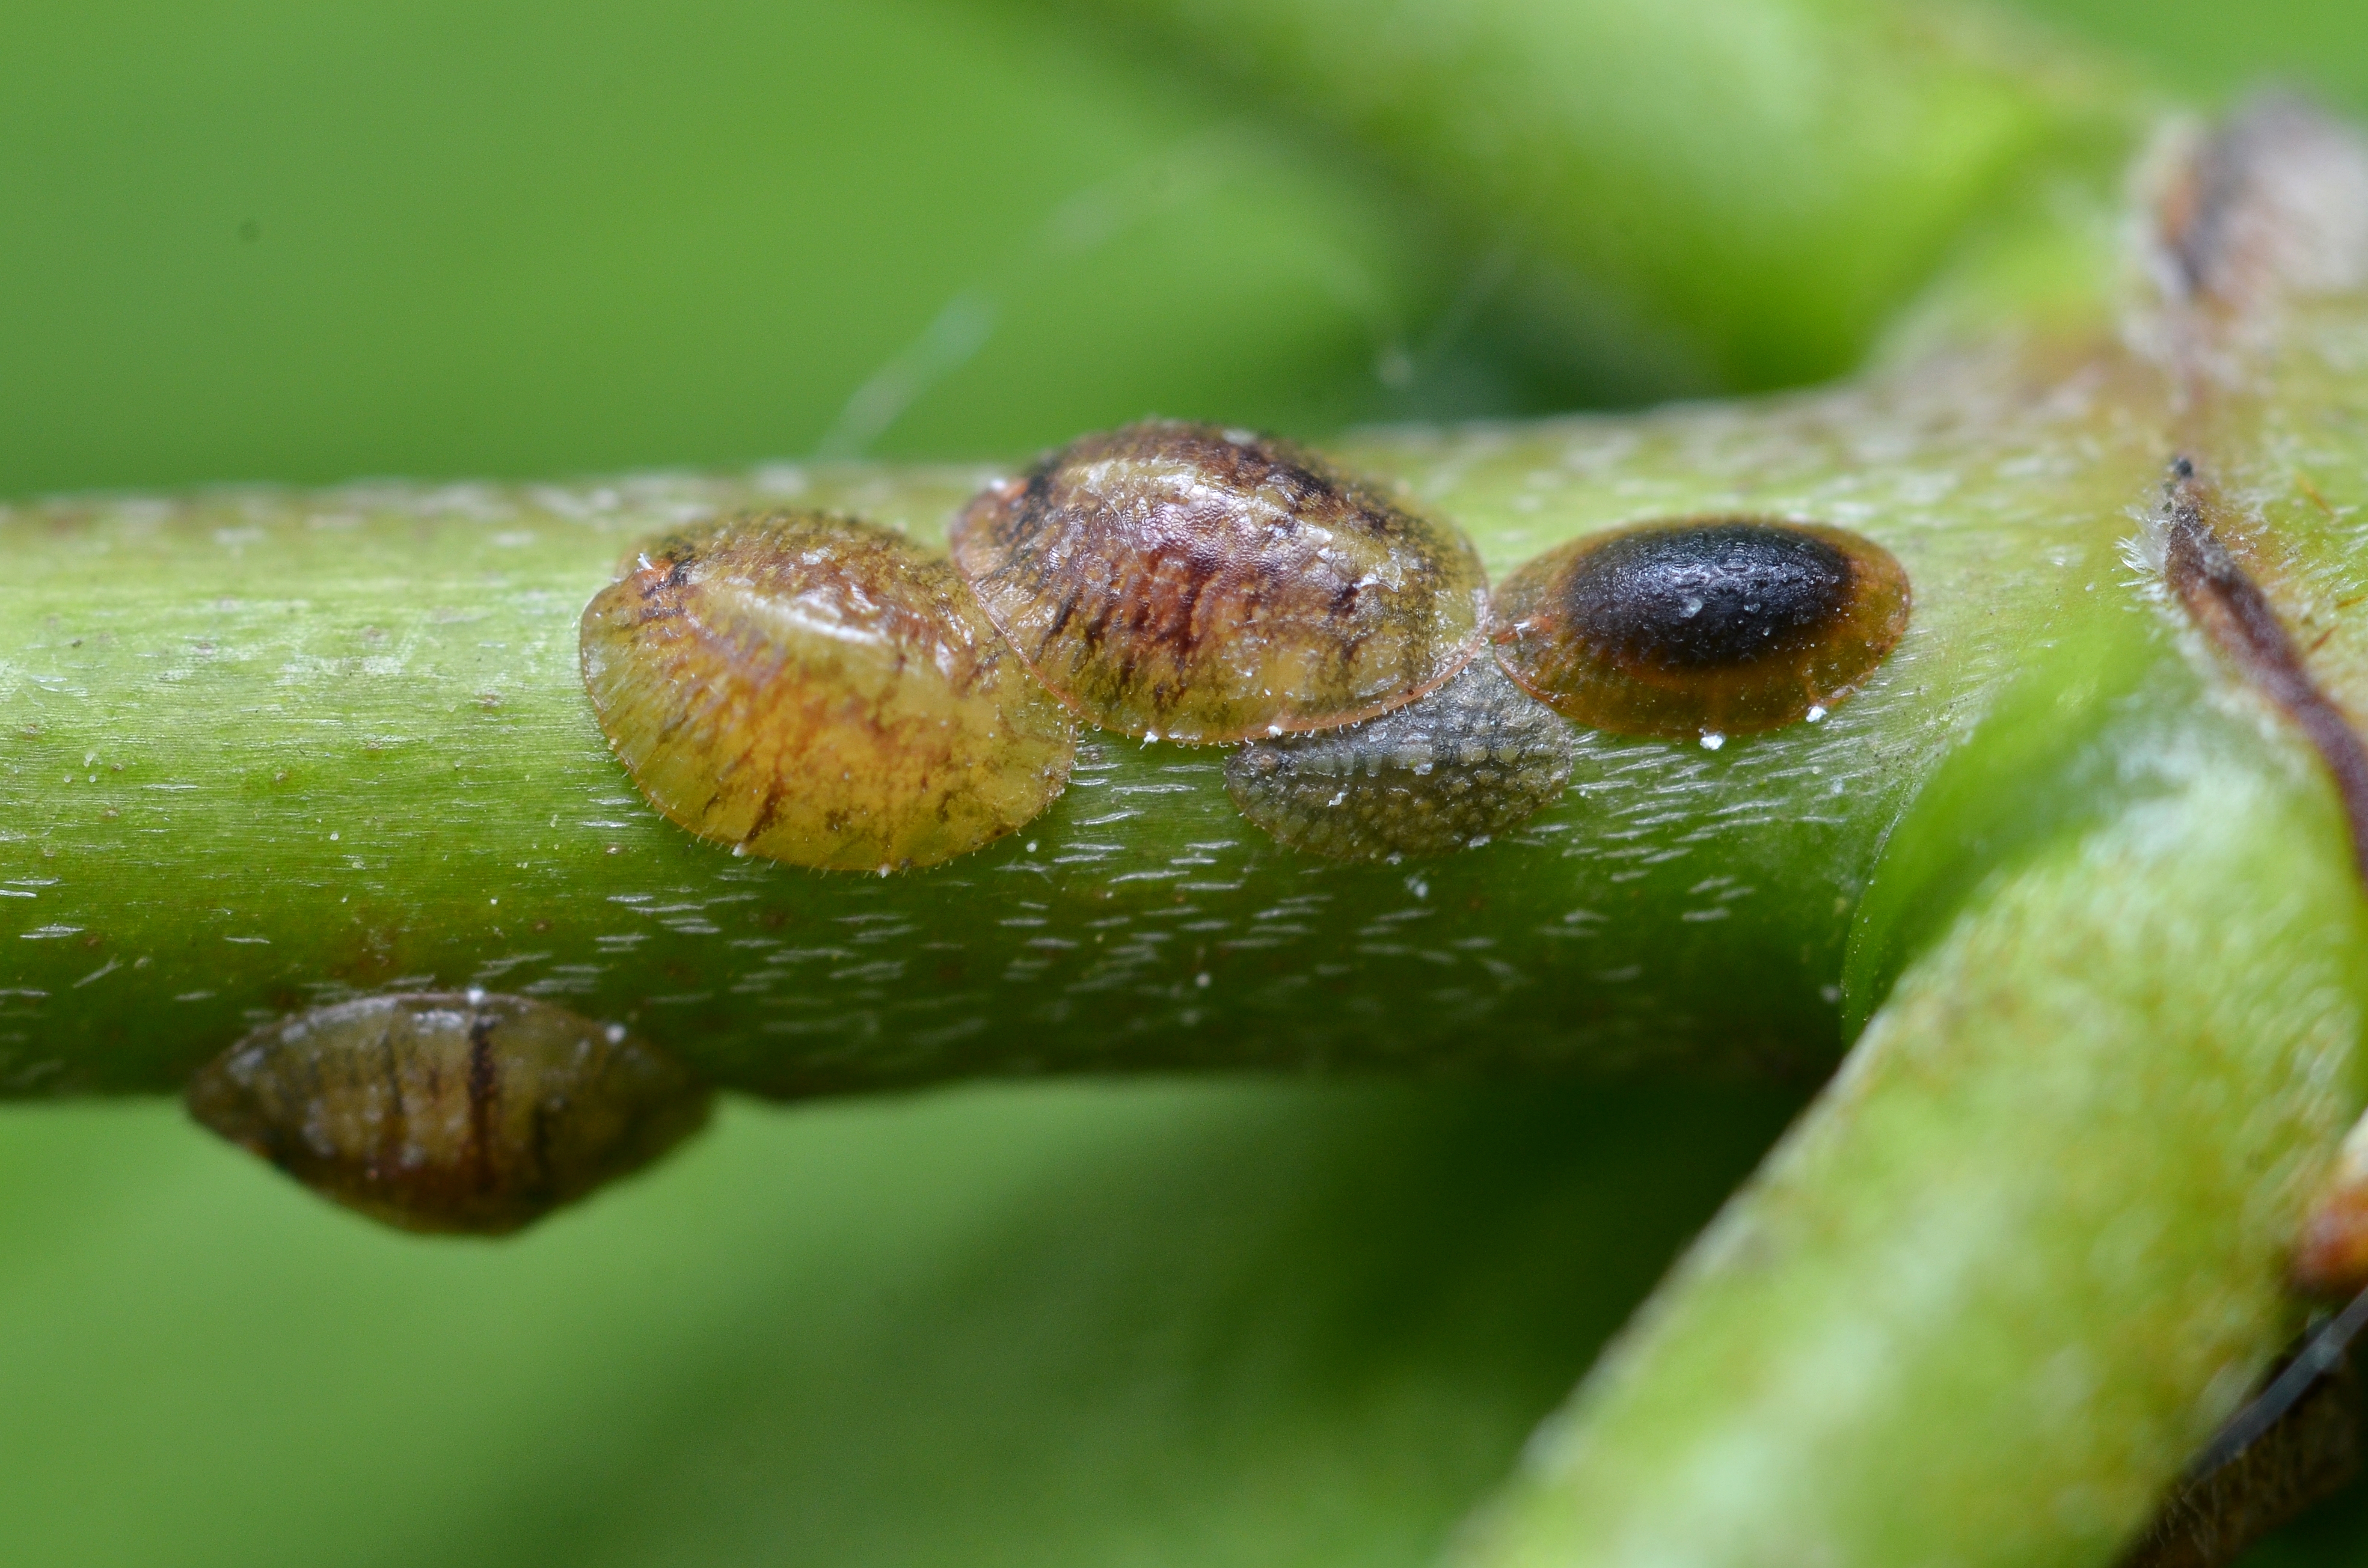 File:Scale insects (7244837120).jpg